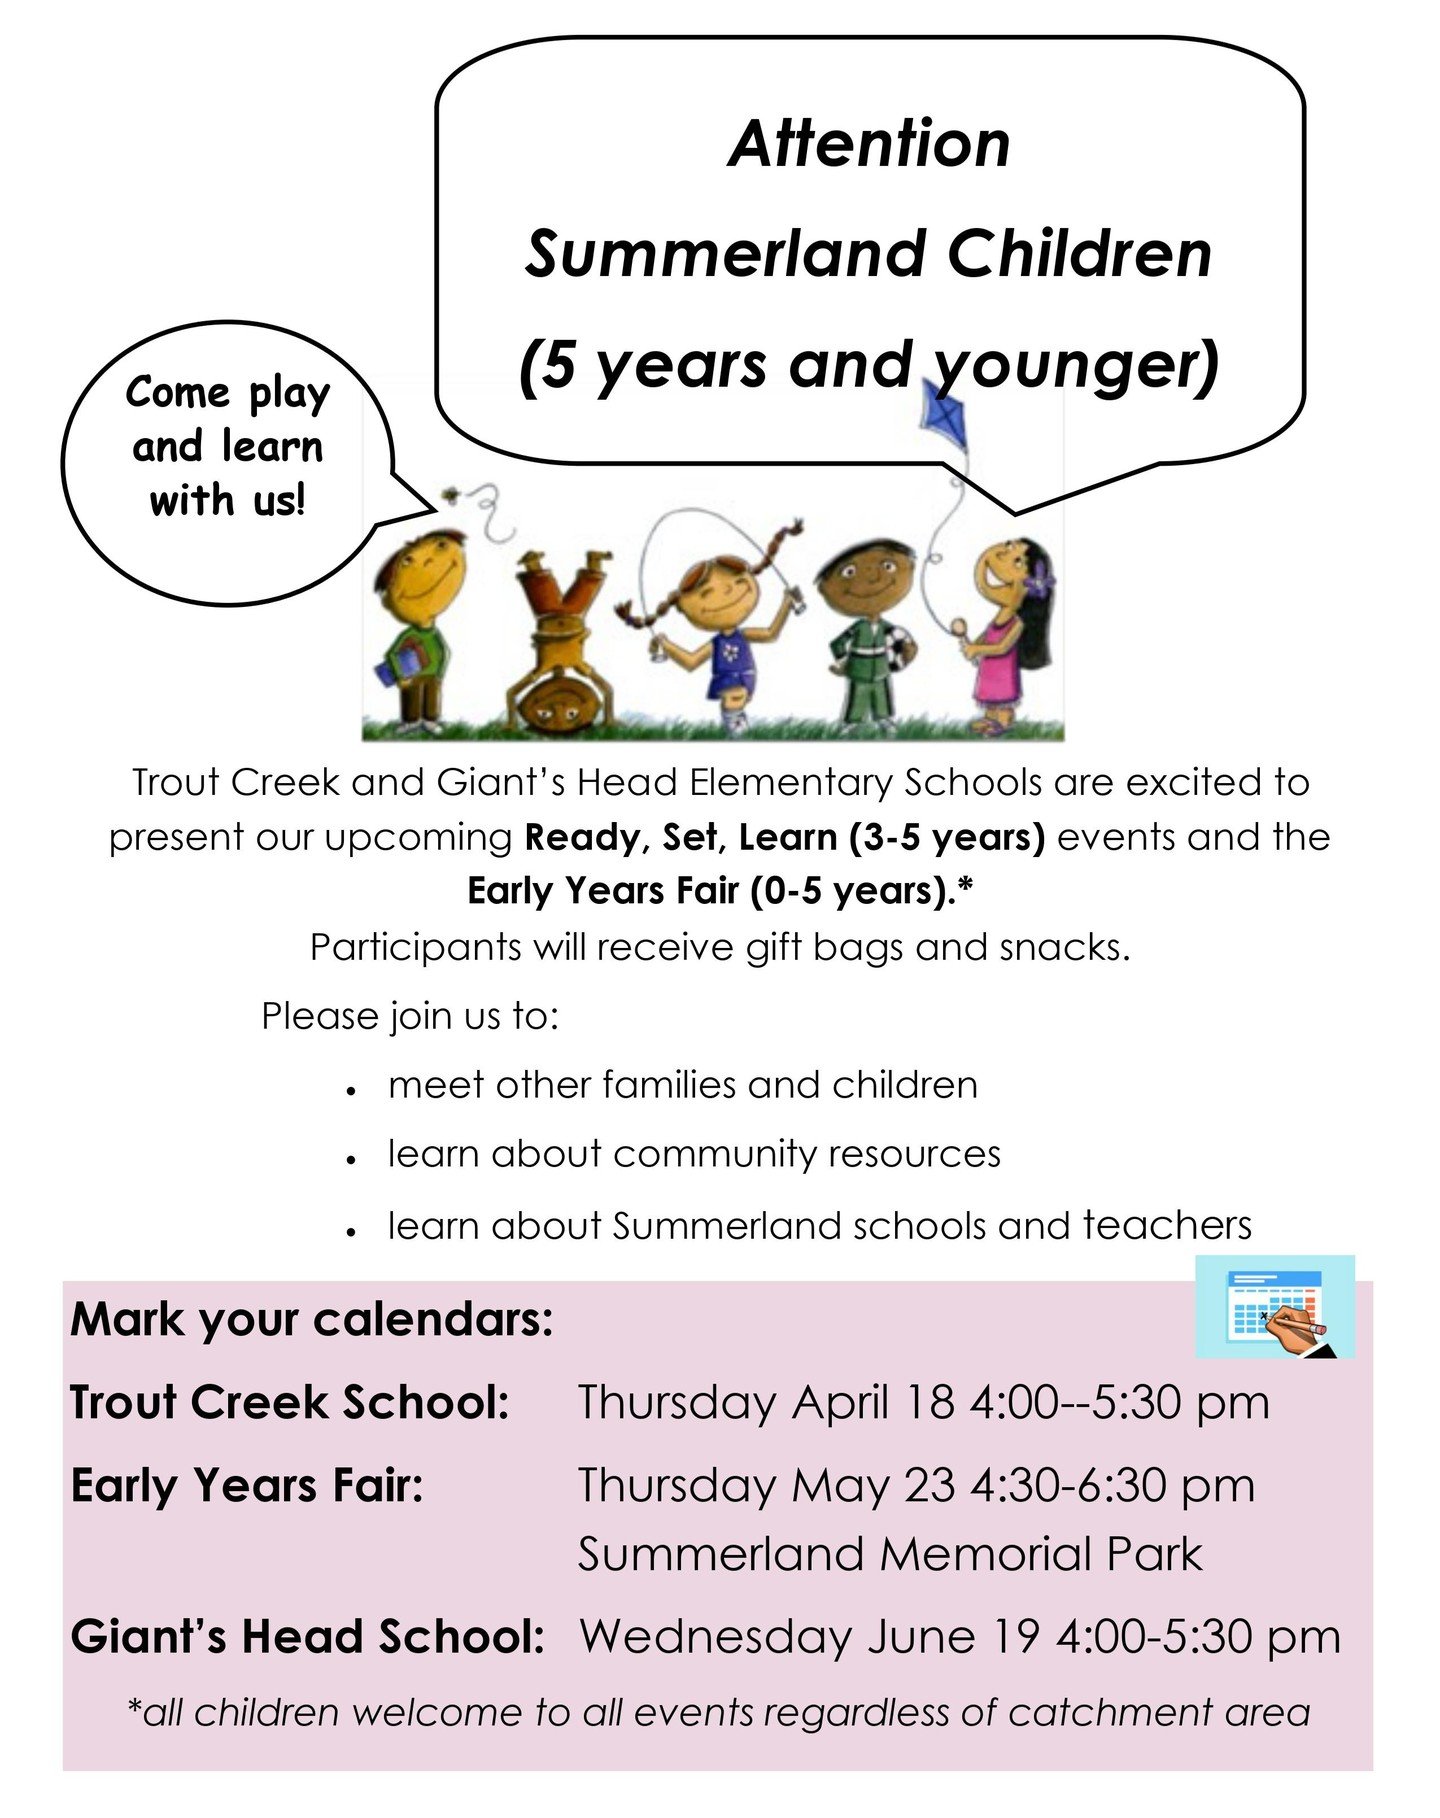 We're very excited to be participating in the Ready, Set, Learn events hosted by Summerland's elementary schools, Giant's Head and Trout Creek. We can't wait to meet the youngest members of our community!
If you have children aged between 3 and 5yrs 